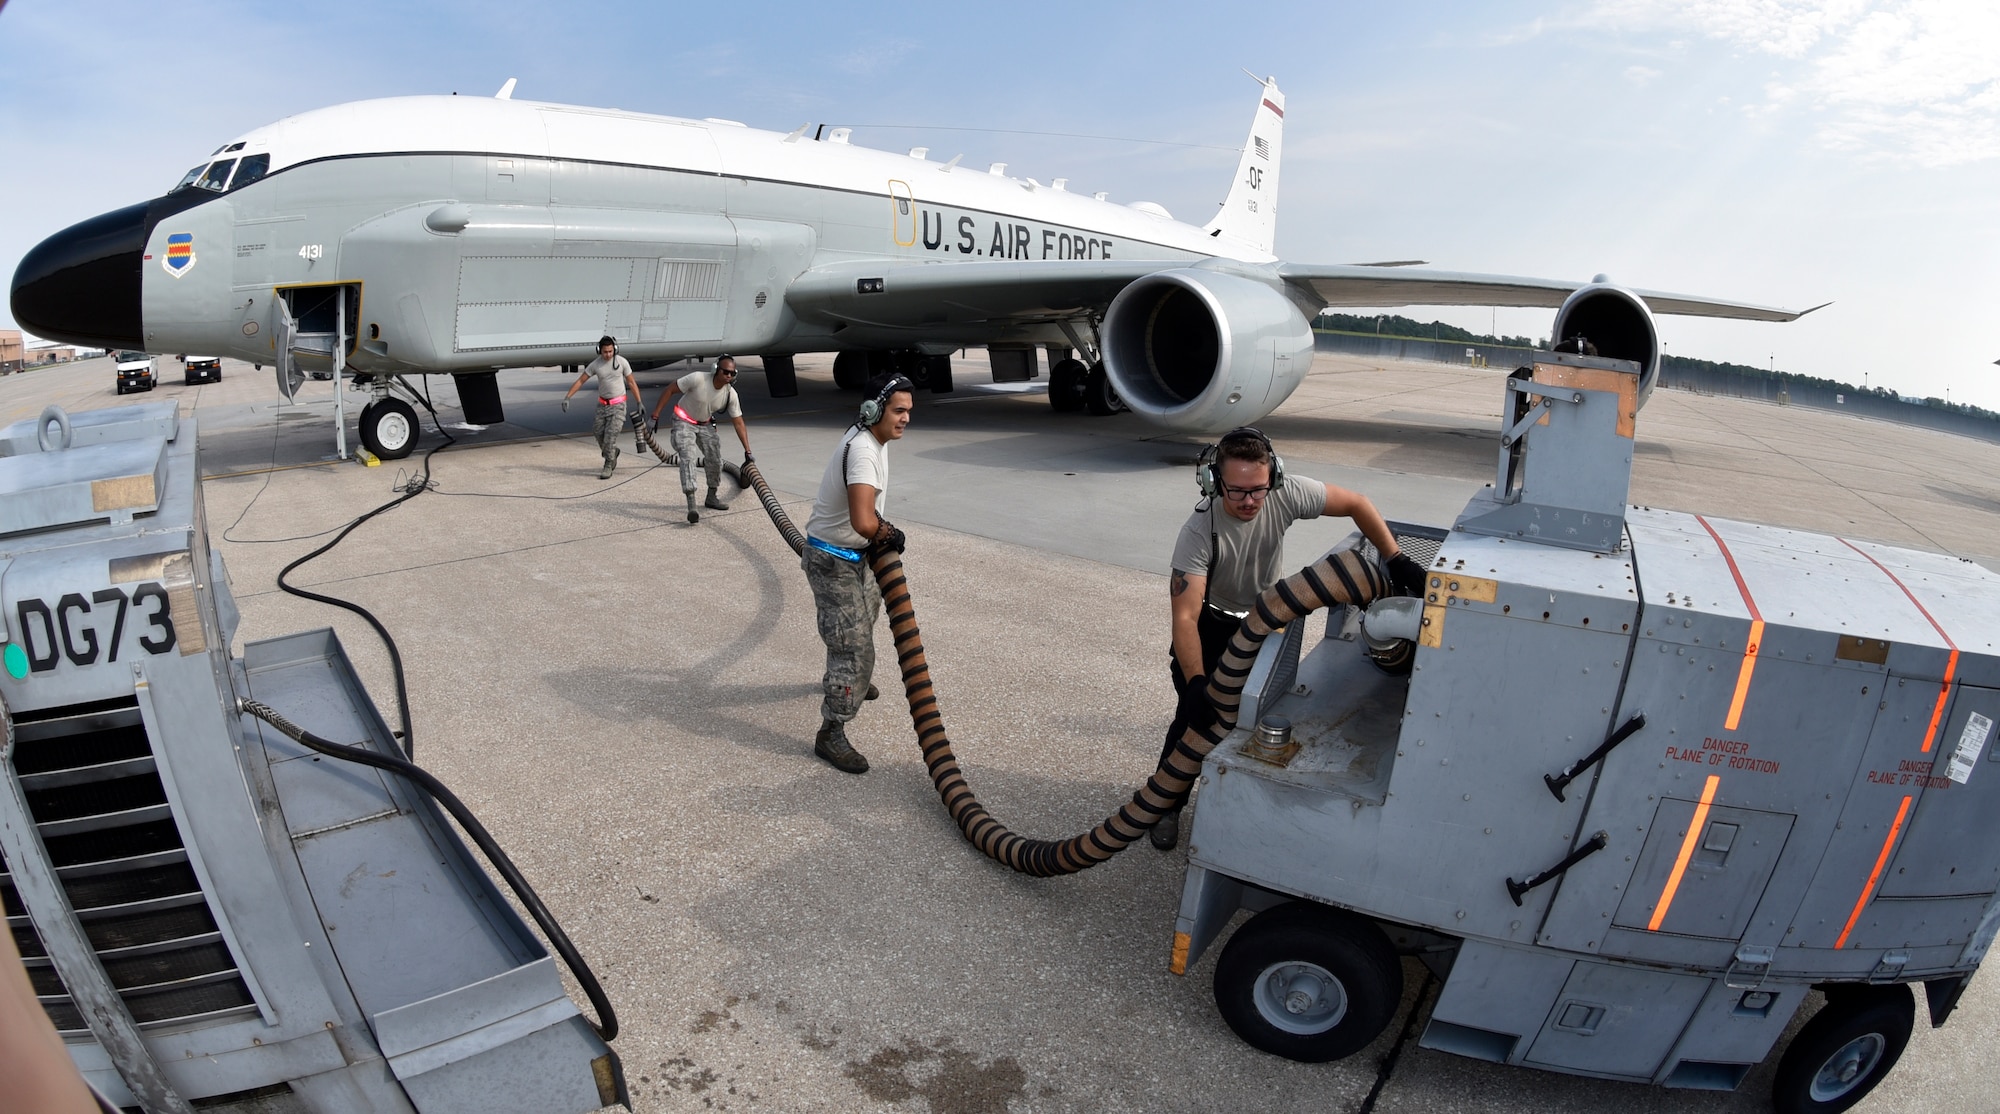 55th Aircraft Maintenance Squadron Airmen (from right to left) Senior Airman Nick Brown, Senior Airman Angel Marroquin, Senior Airman Eric Kline and Airman First Class Kawika Toledano, stow an air hose from an air cart after starting a RC-135V/W Rivet Joint's four CFM International F108-CF-201 high-bypass turbofan engines Aug. 5, 2018 at Offutt Air Force Base, Nebraska. (U.S. Air Force photo by 2nd Lt. Drew Nystrom)